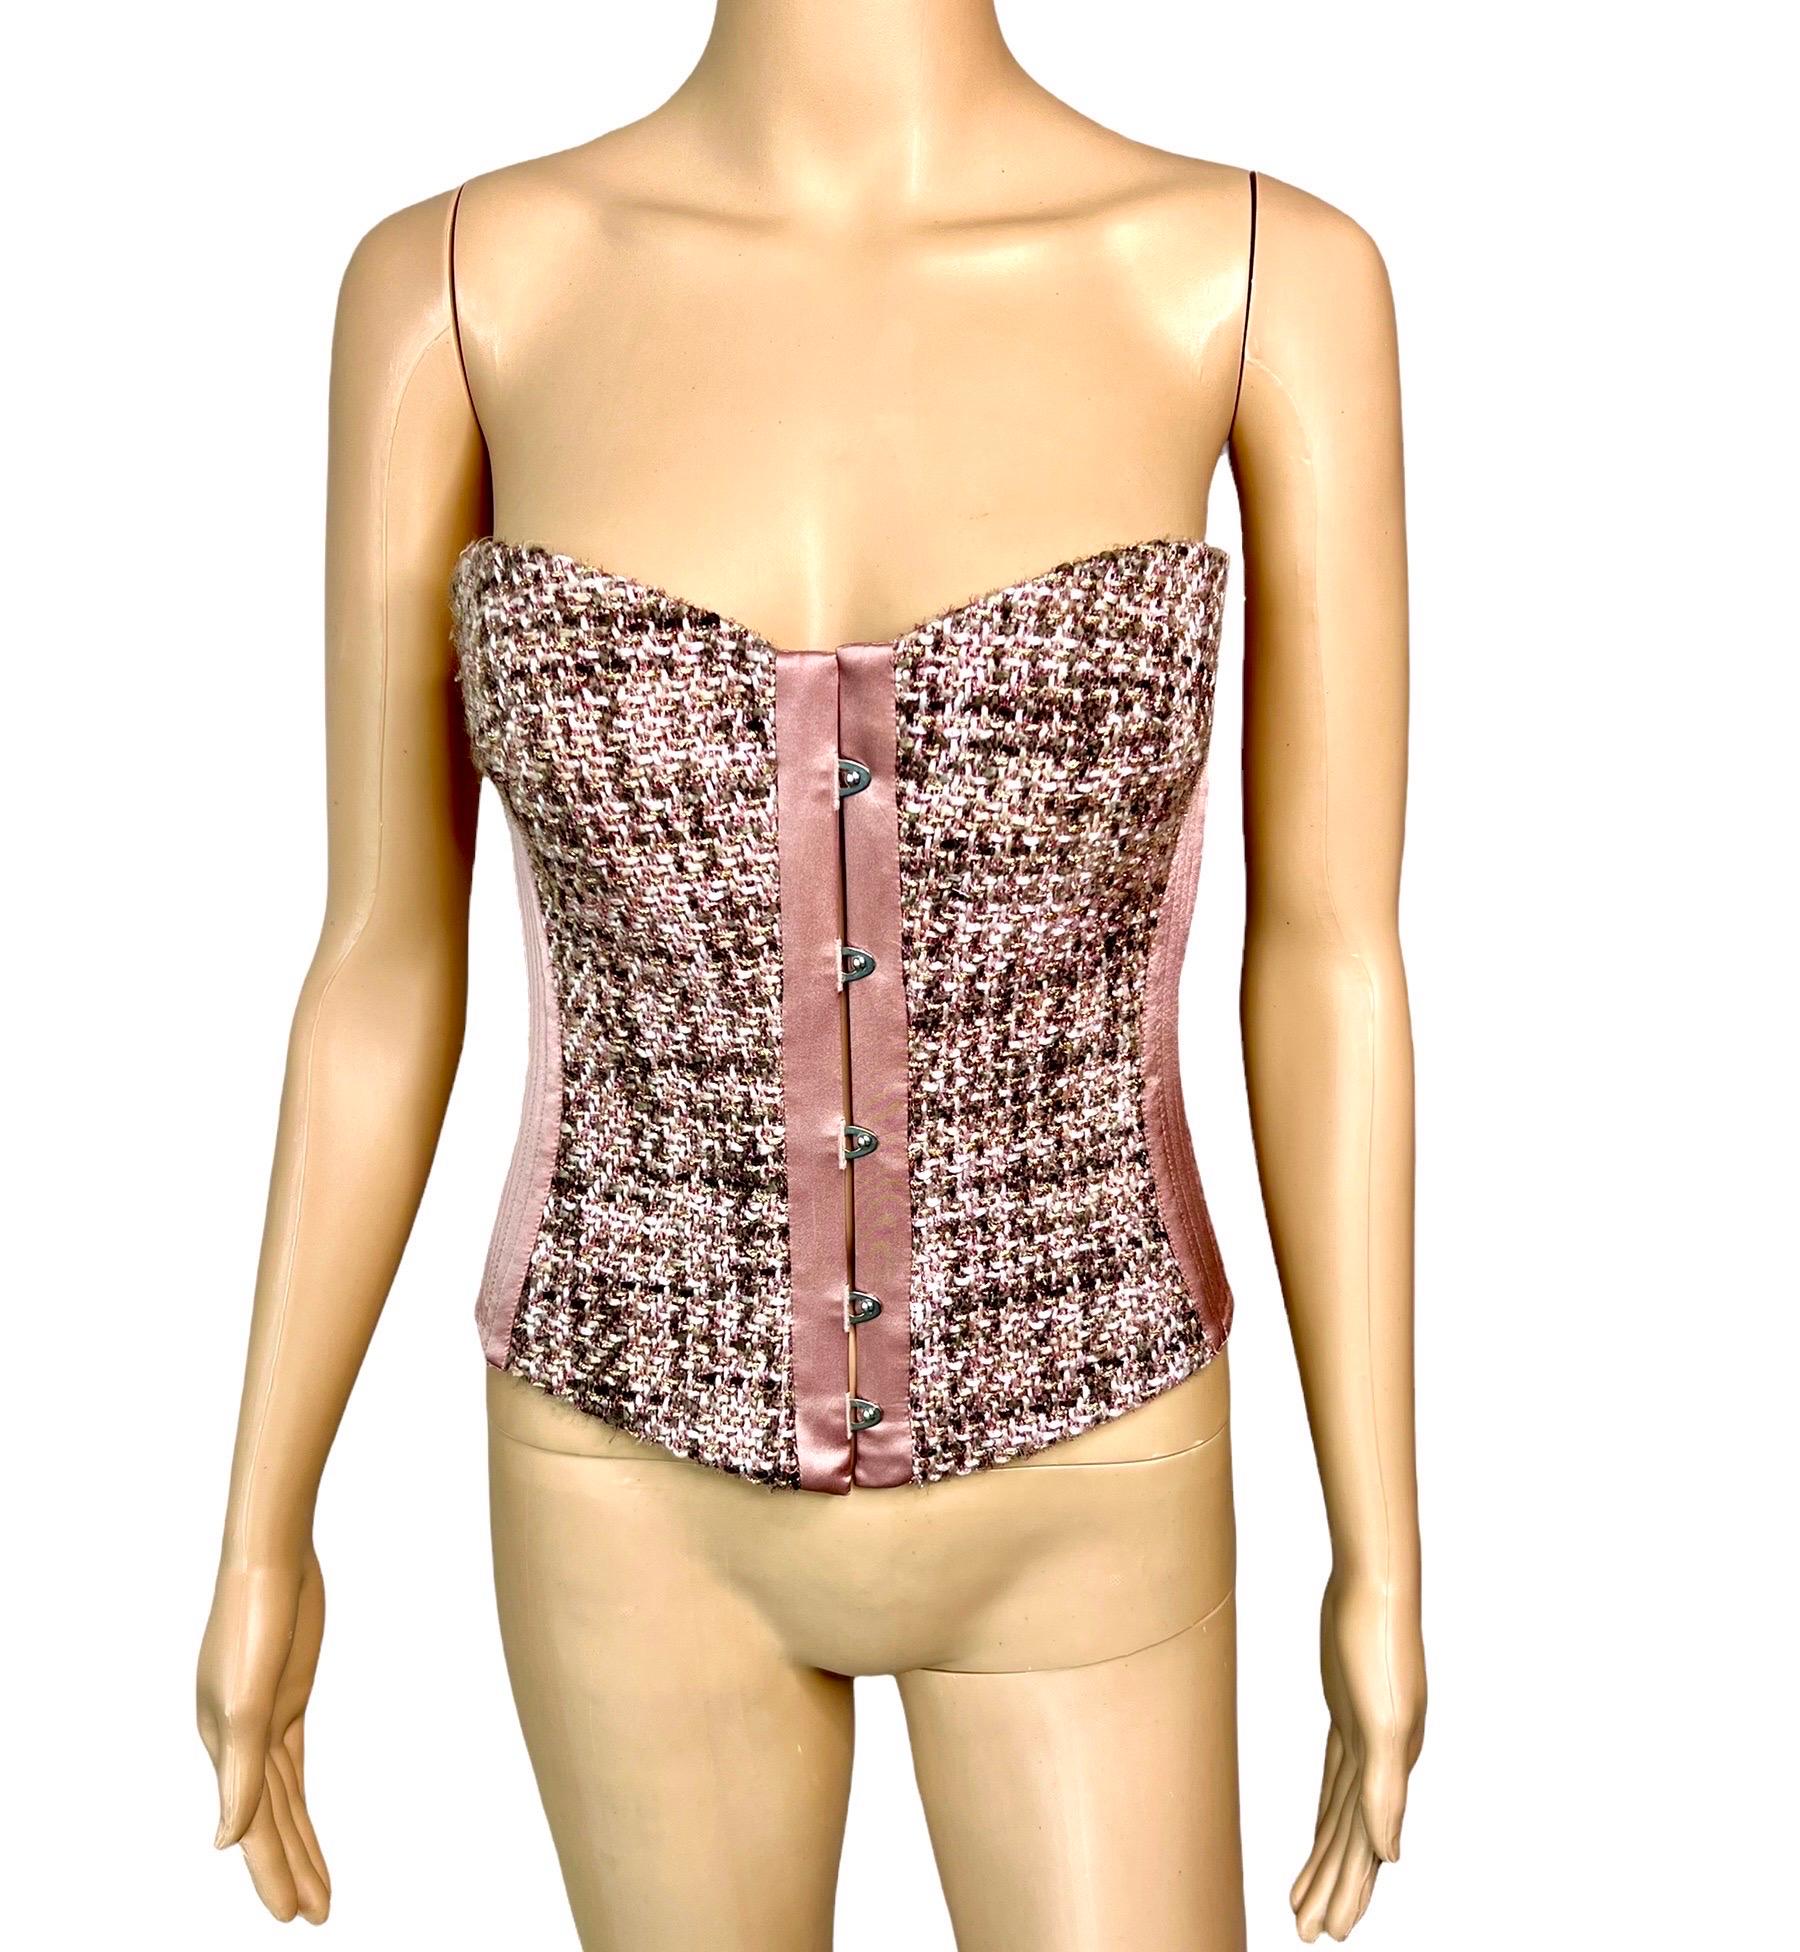 Roberto Cavalli c.2005 Bustier Tweed Satin Lace Up Corset Top IT 42

Roberto Cavalli structured boned corset top featuring tweed and satin panels, hook eye closure in front, and lace up back with gold tone eyelets. 